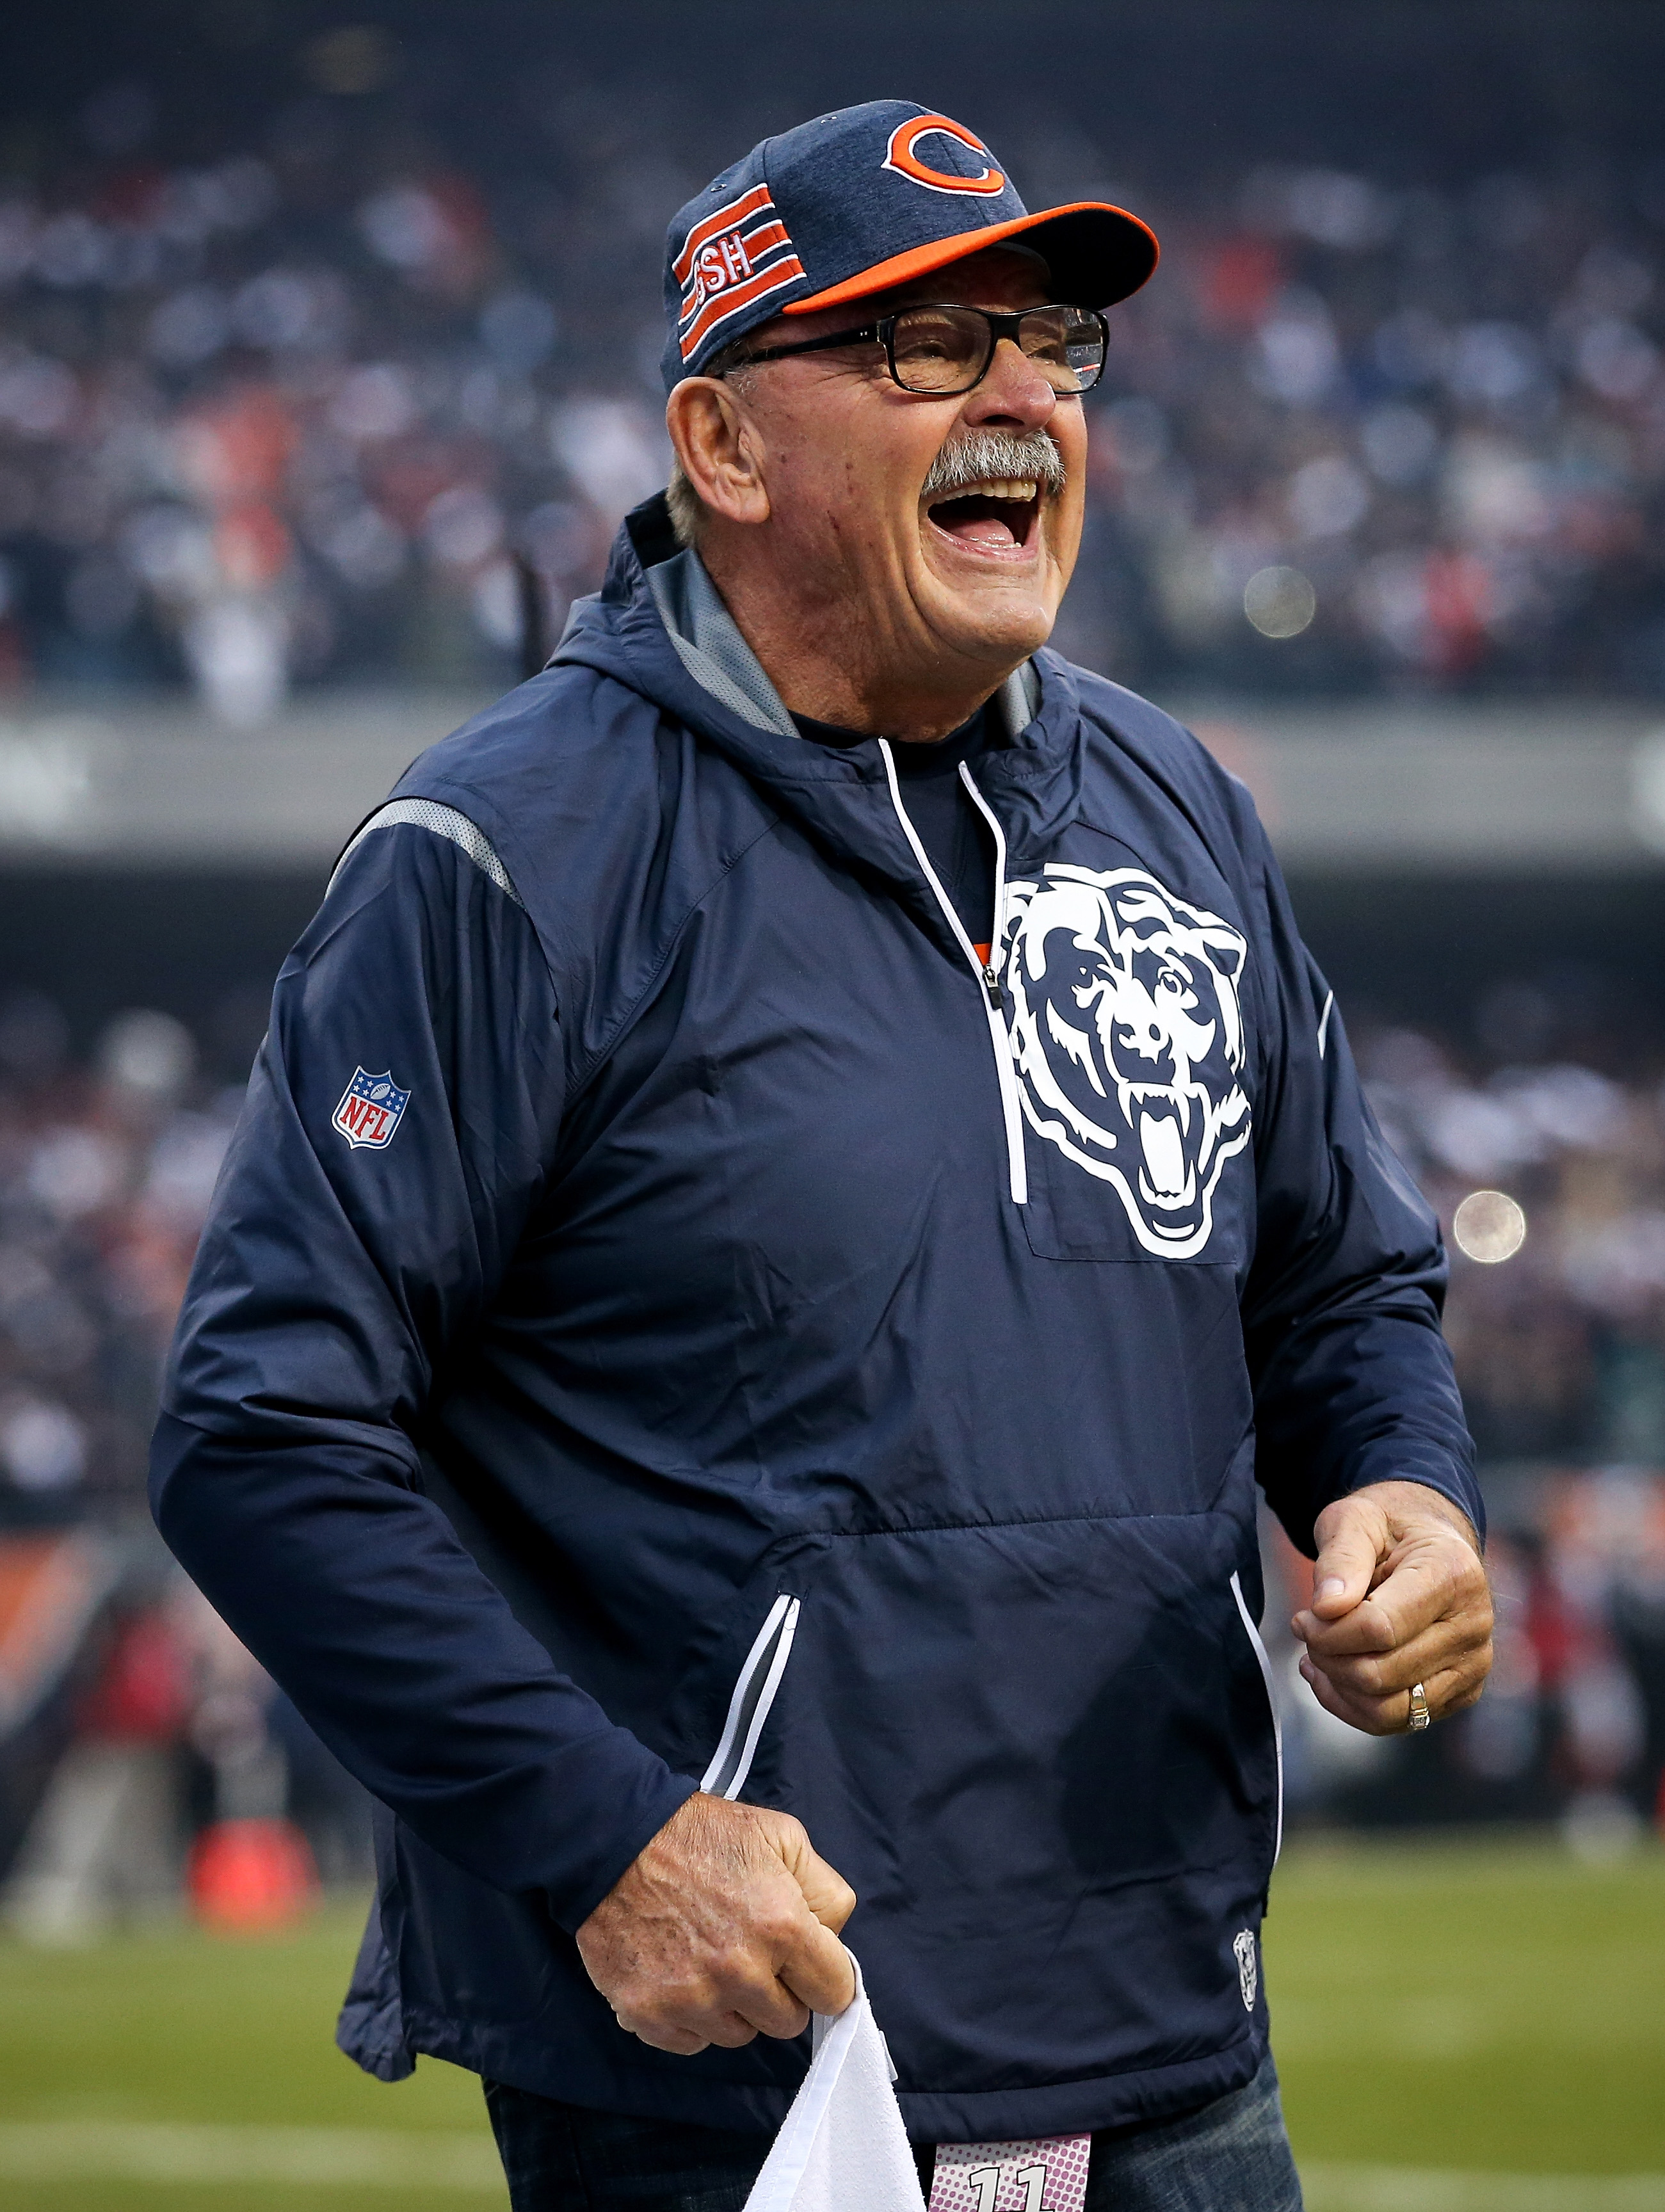 Dick Butkus during the NFC Wild Card Playoff game at Soldier Field on January 6, 2019 in Chicago, Illinois. | Sources: Getty Images